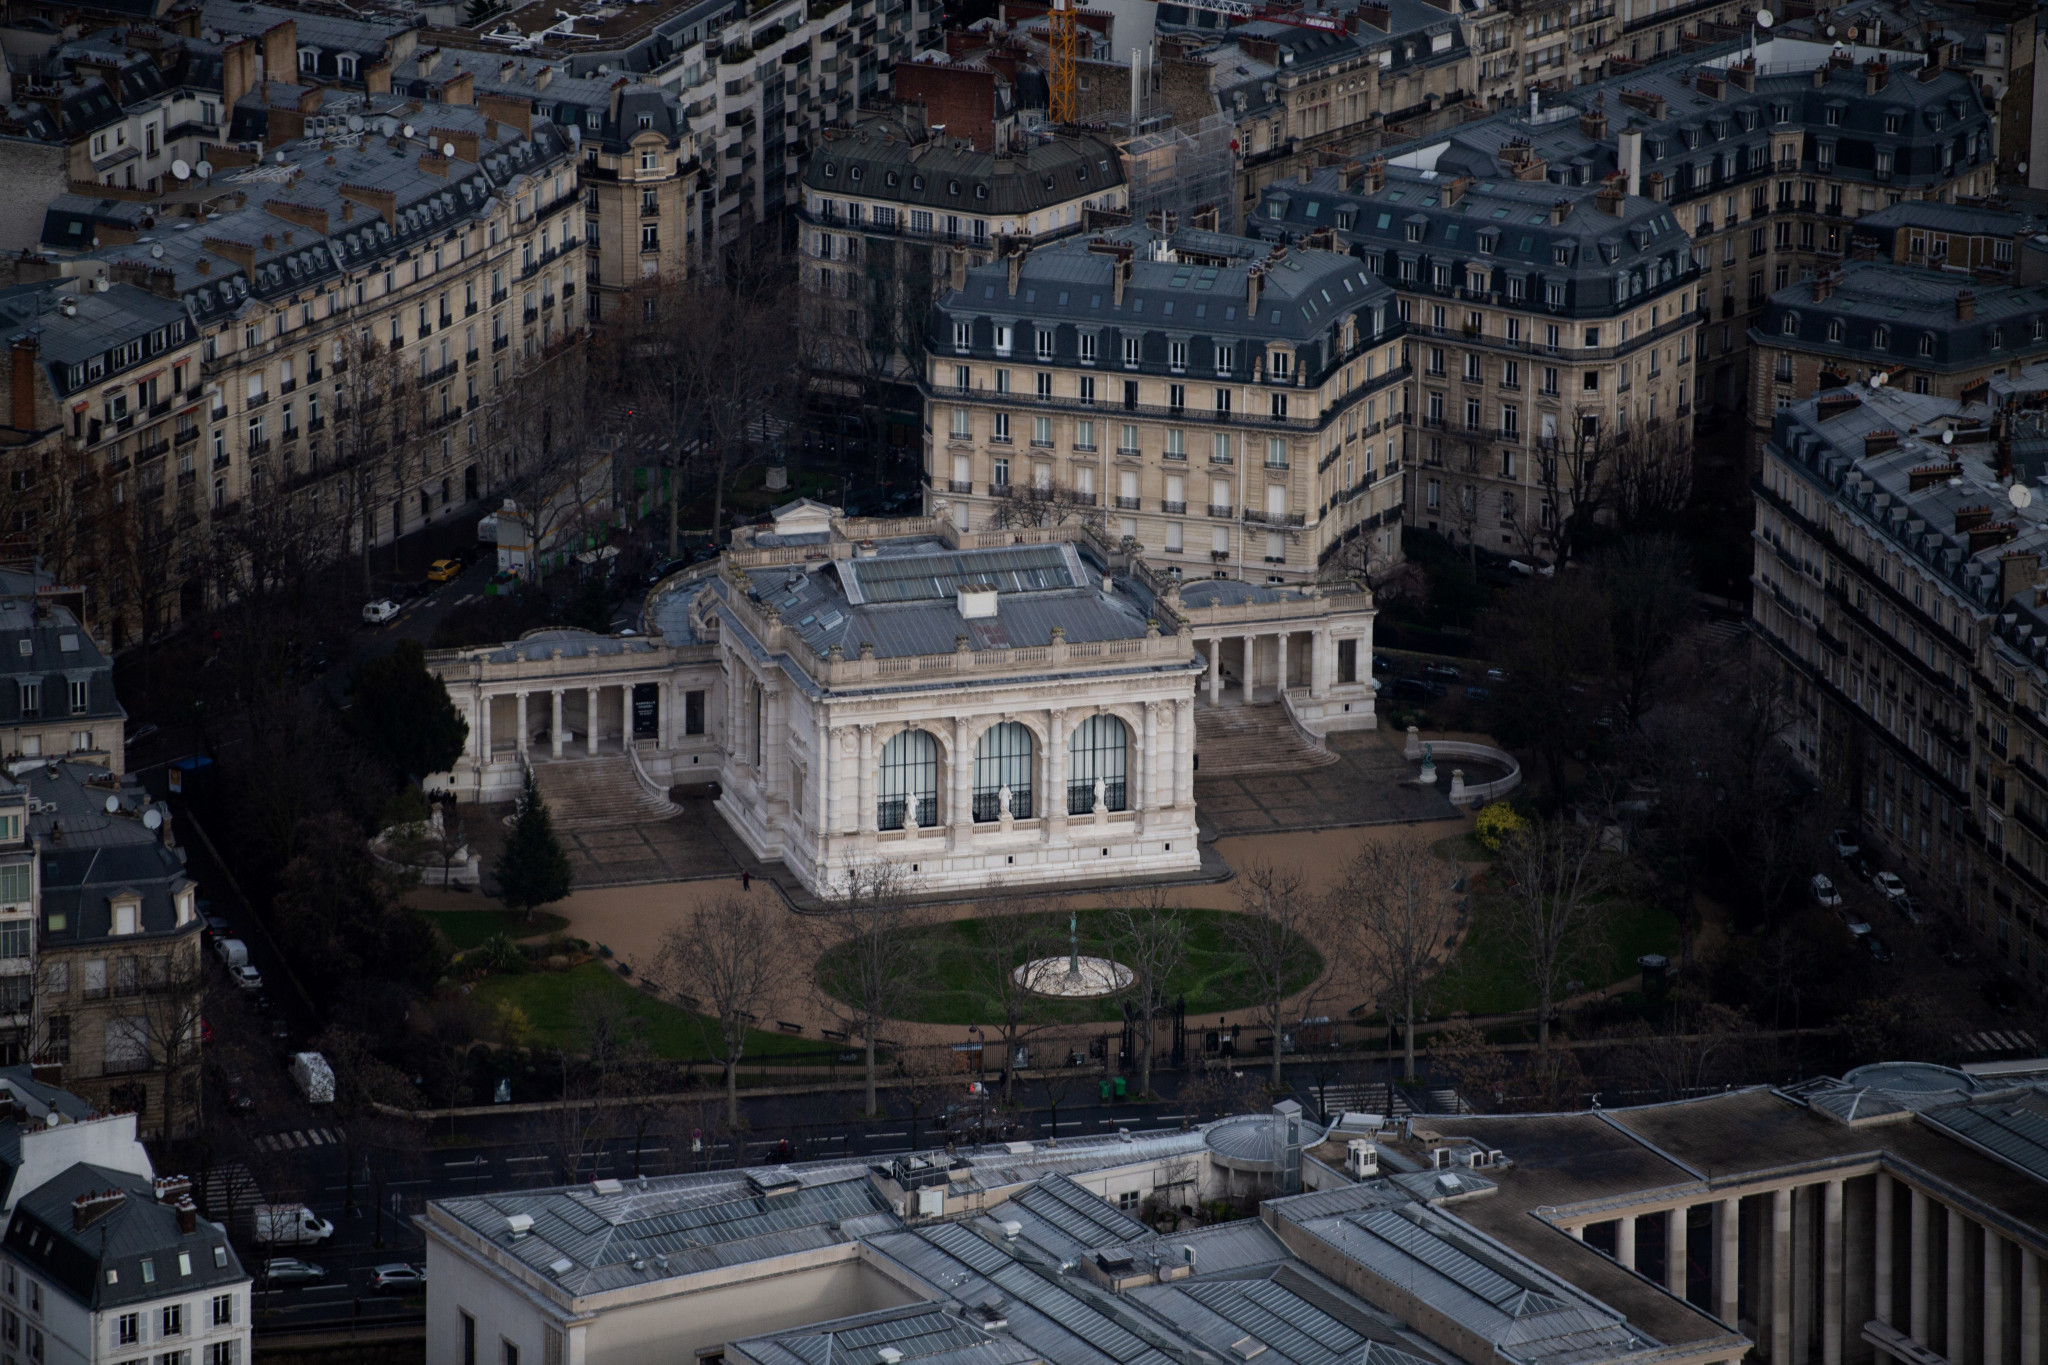 The Paris Galliera is one of 14 major Parisian museums planning special exhibitions for the Paris 2024 Olympics and Paralympics ©Getty Images